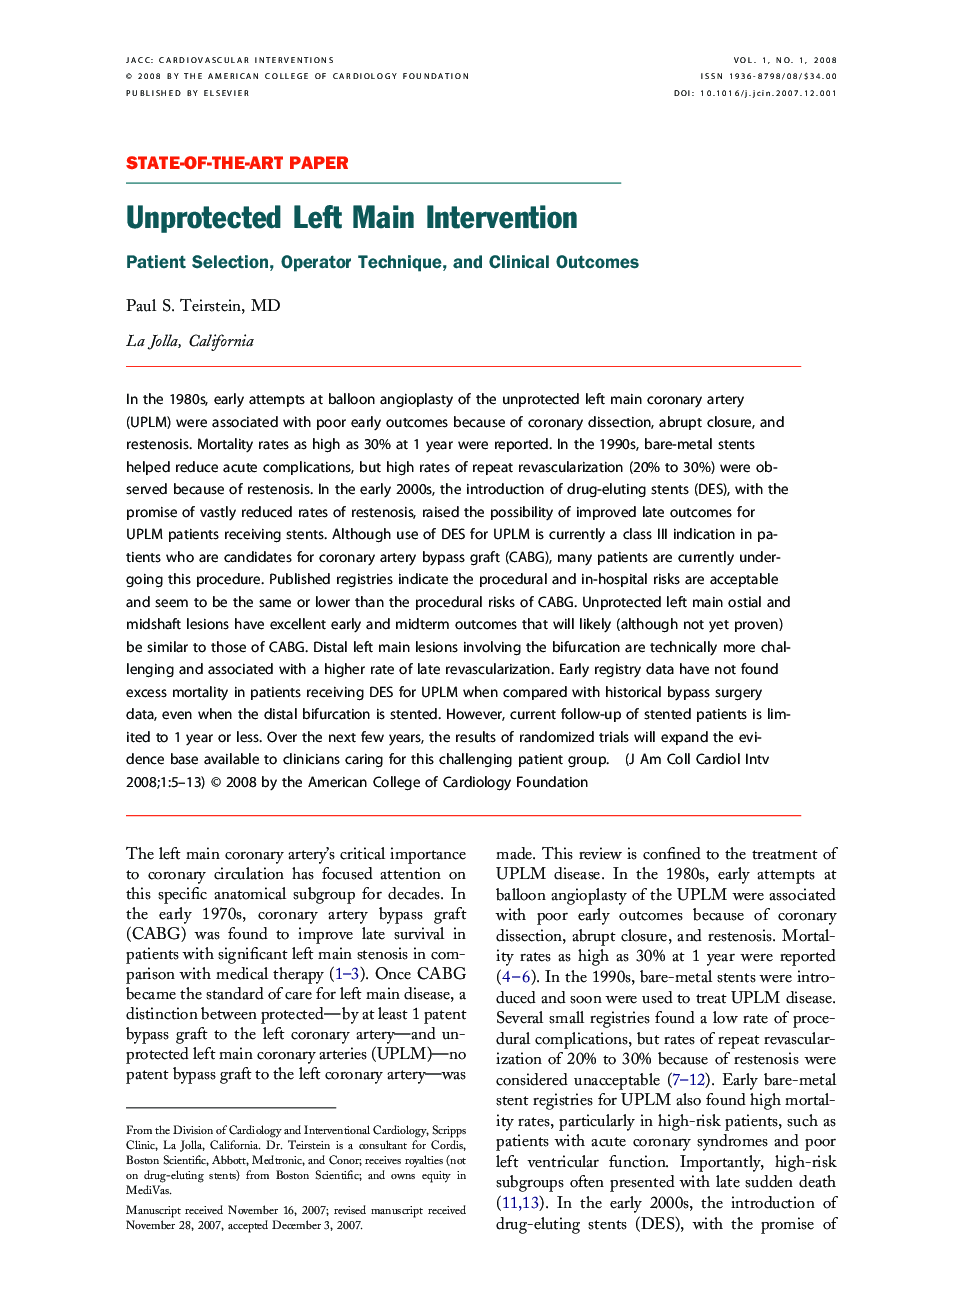 Unprotected Left Main Intervention